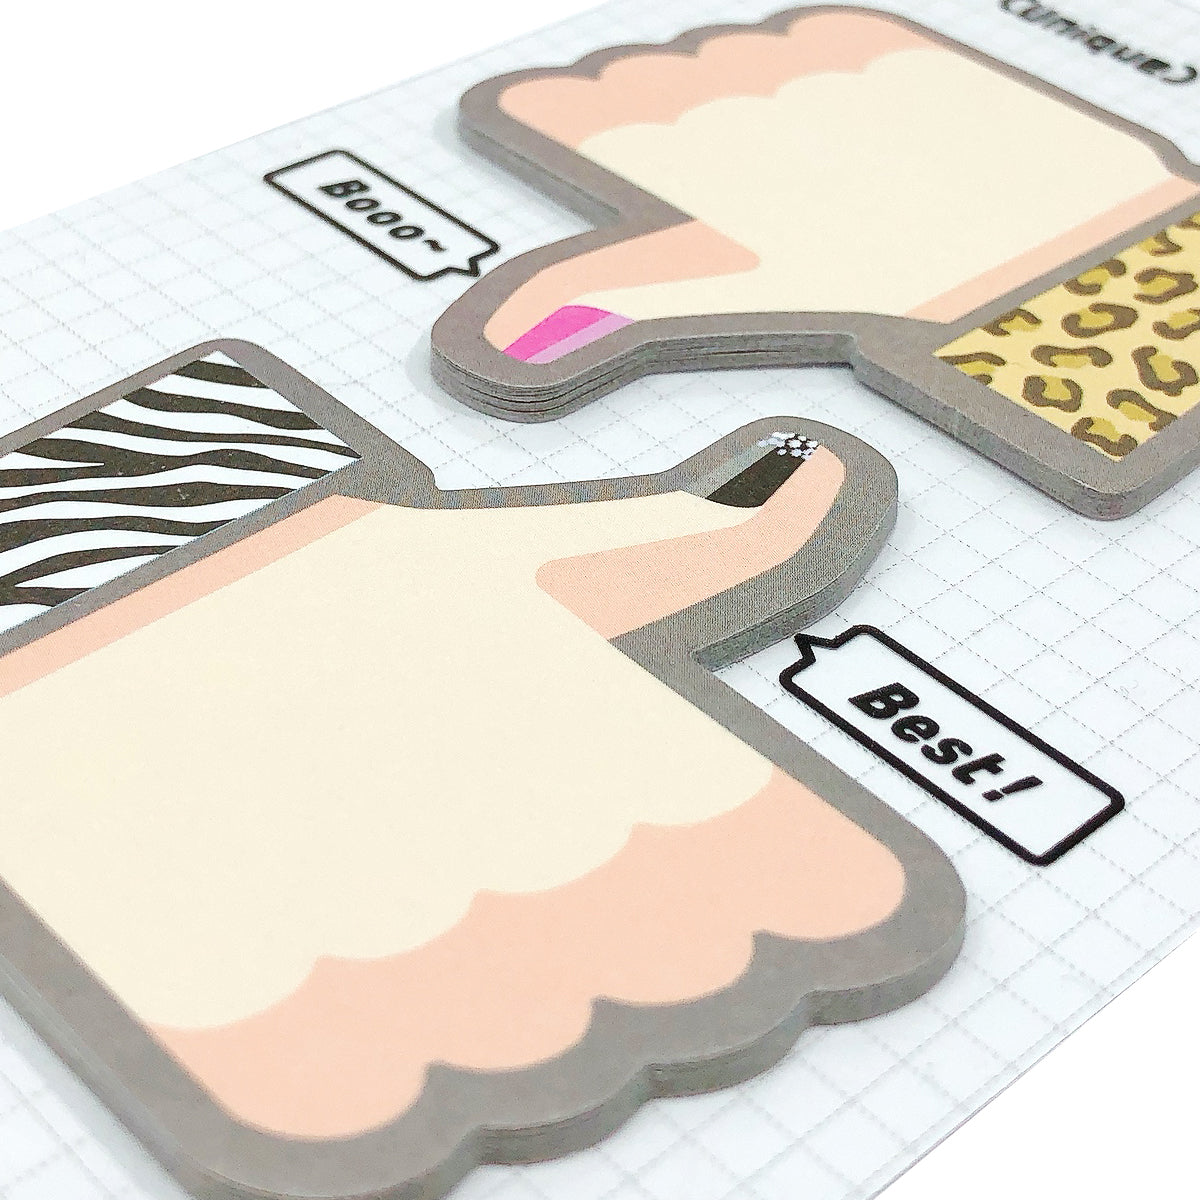 Wrapables Thumbs Up Thumbs Down Sticky Notes (Set of 2)